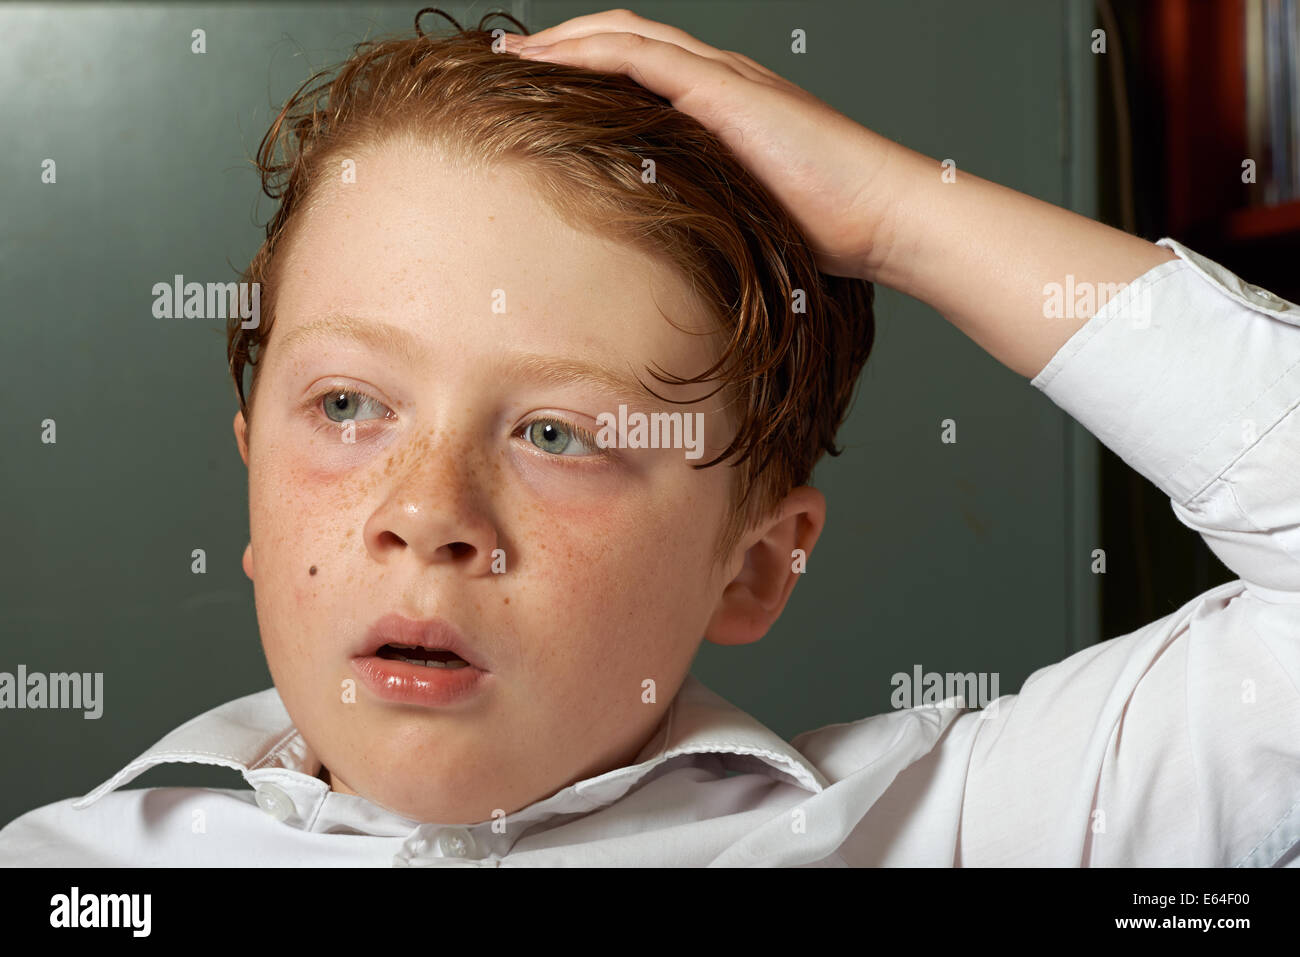 Young English boy with ginger hair Stock Photo